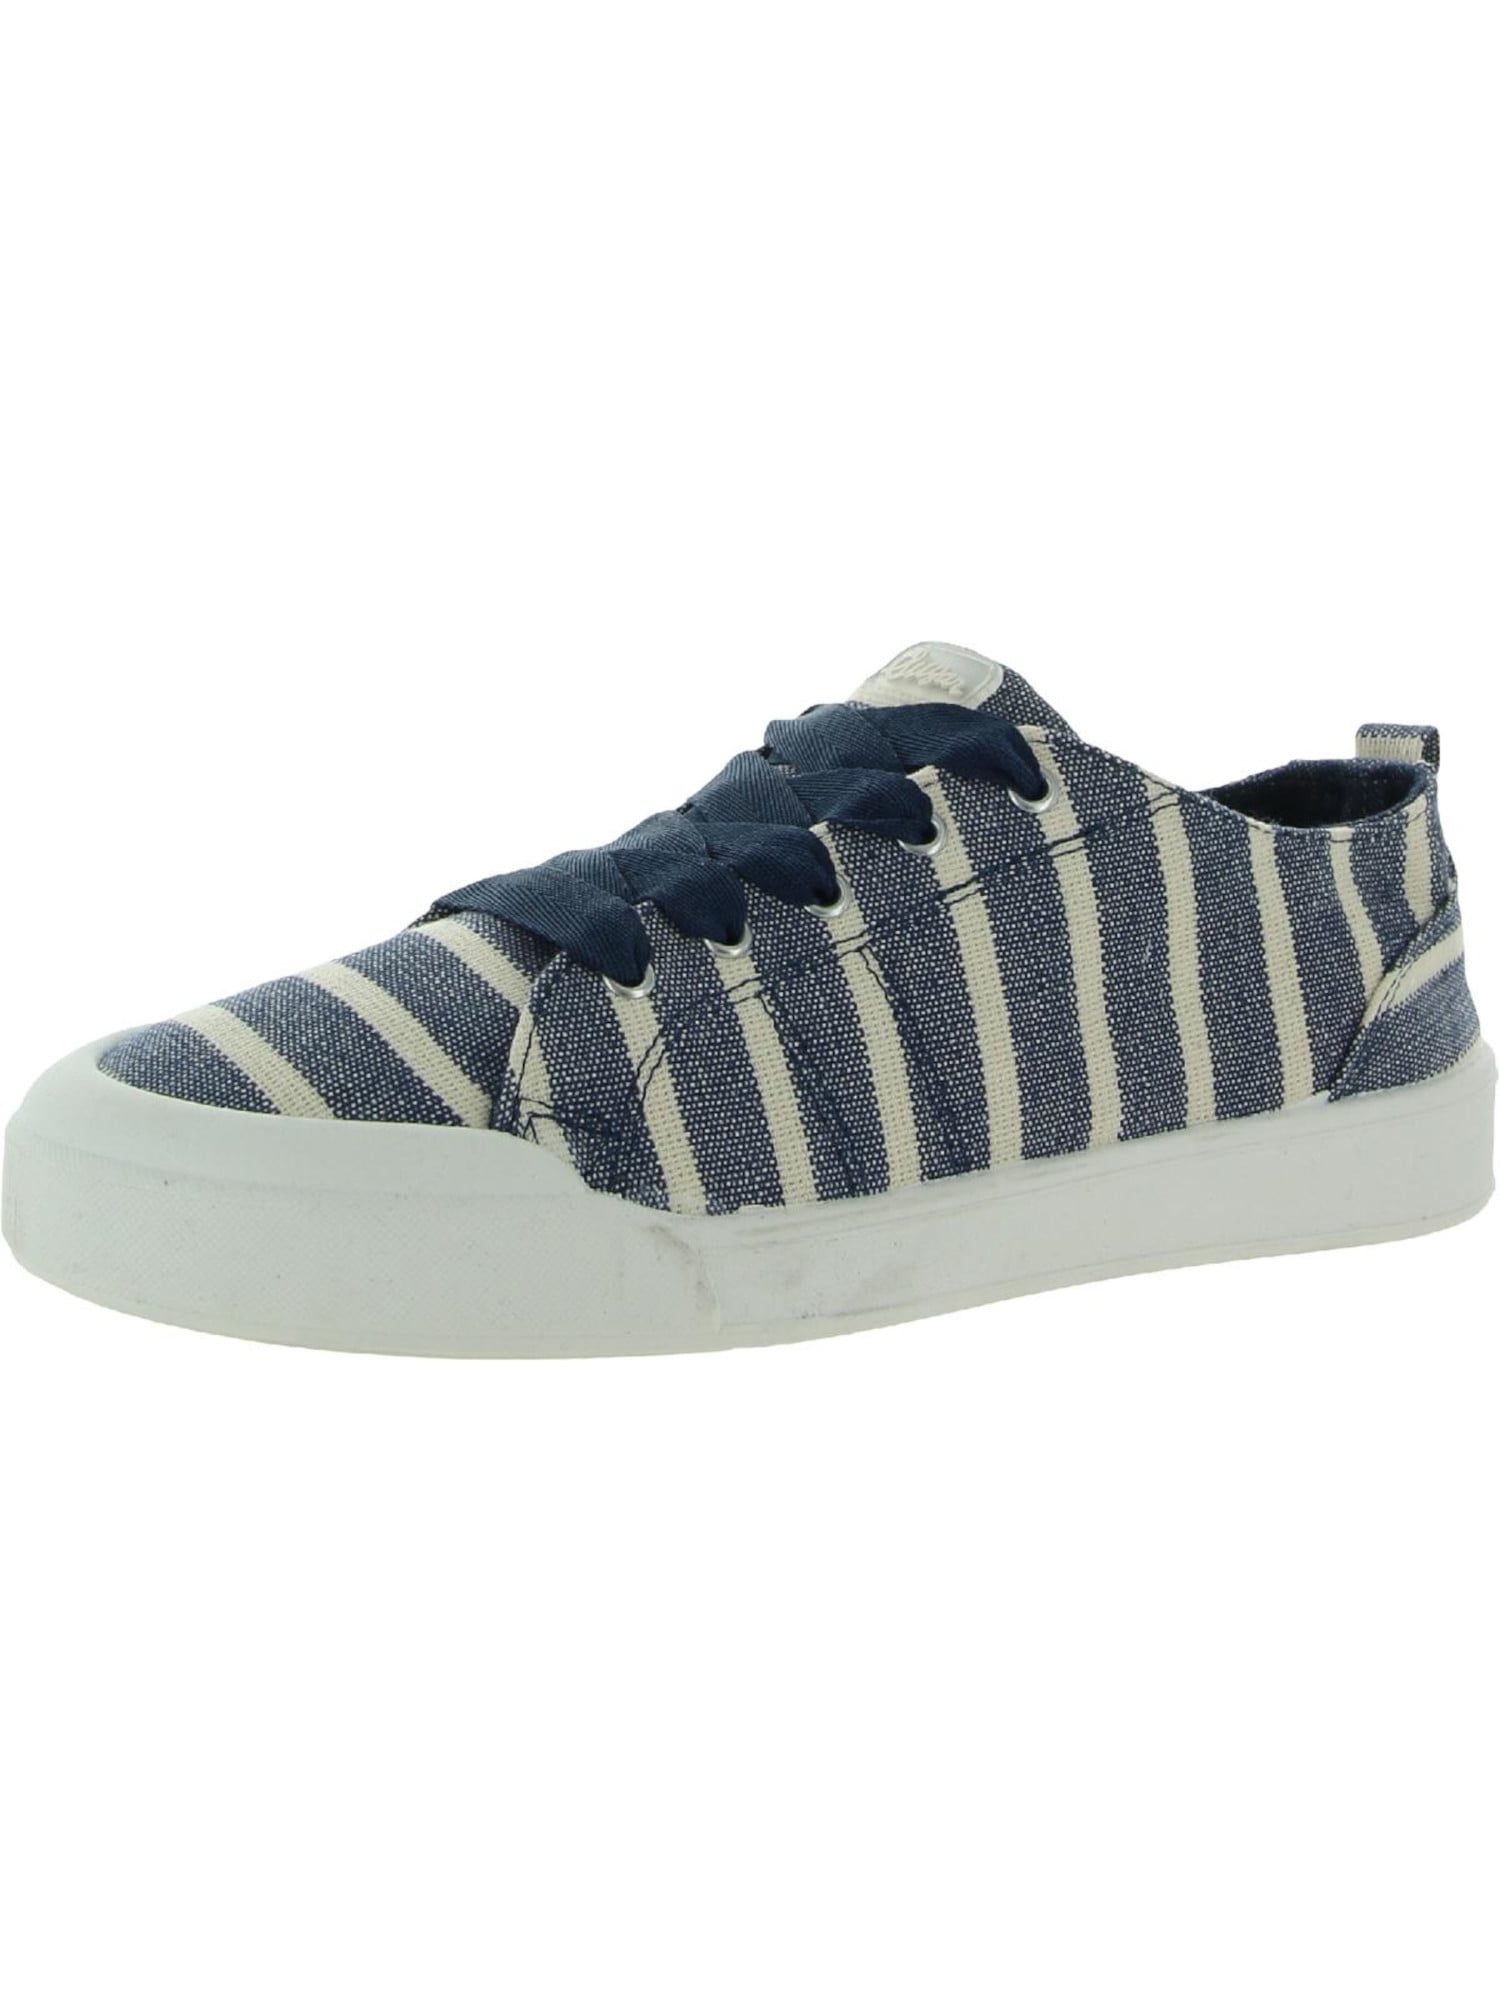 Womens Sgr-Festival Canvas Up Casual and Fashion Sneakers - Walmart.com